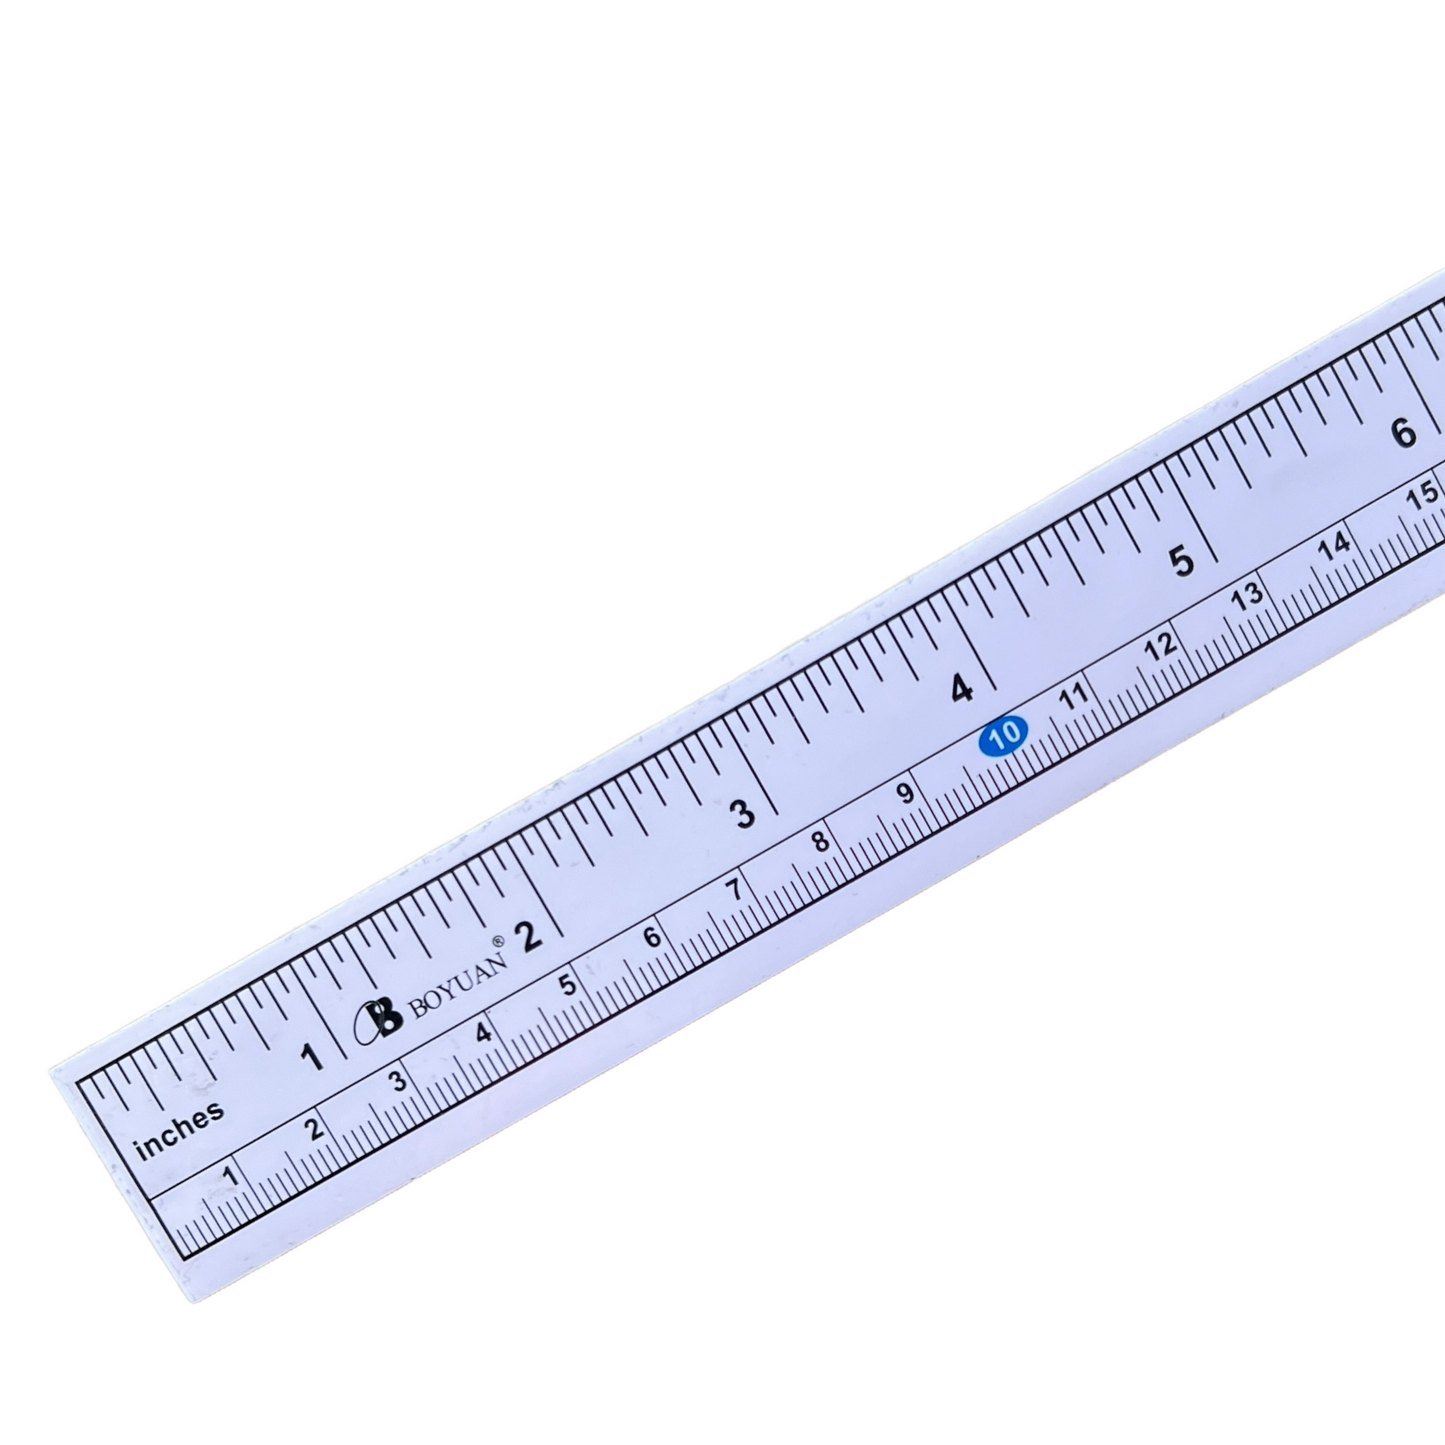 Adhesive Ruler for Crafts  SPIRIT SPARKPLUGS   